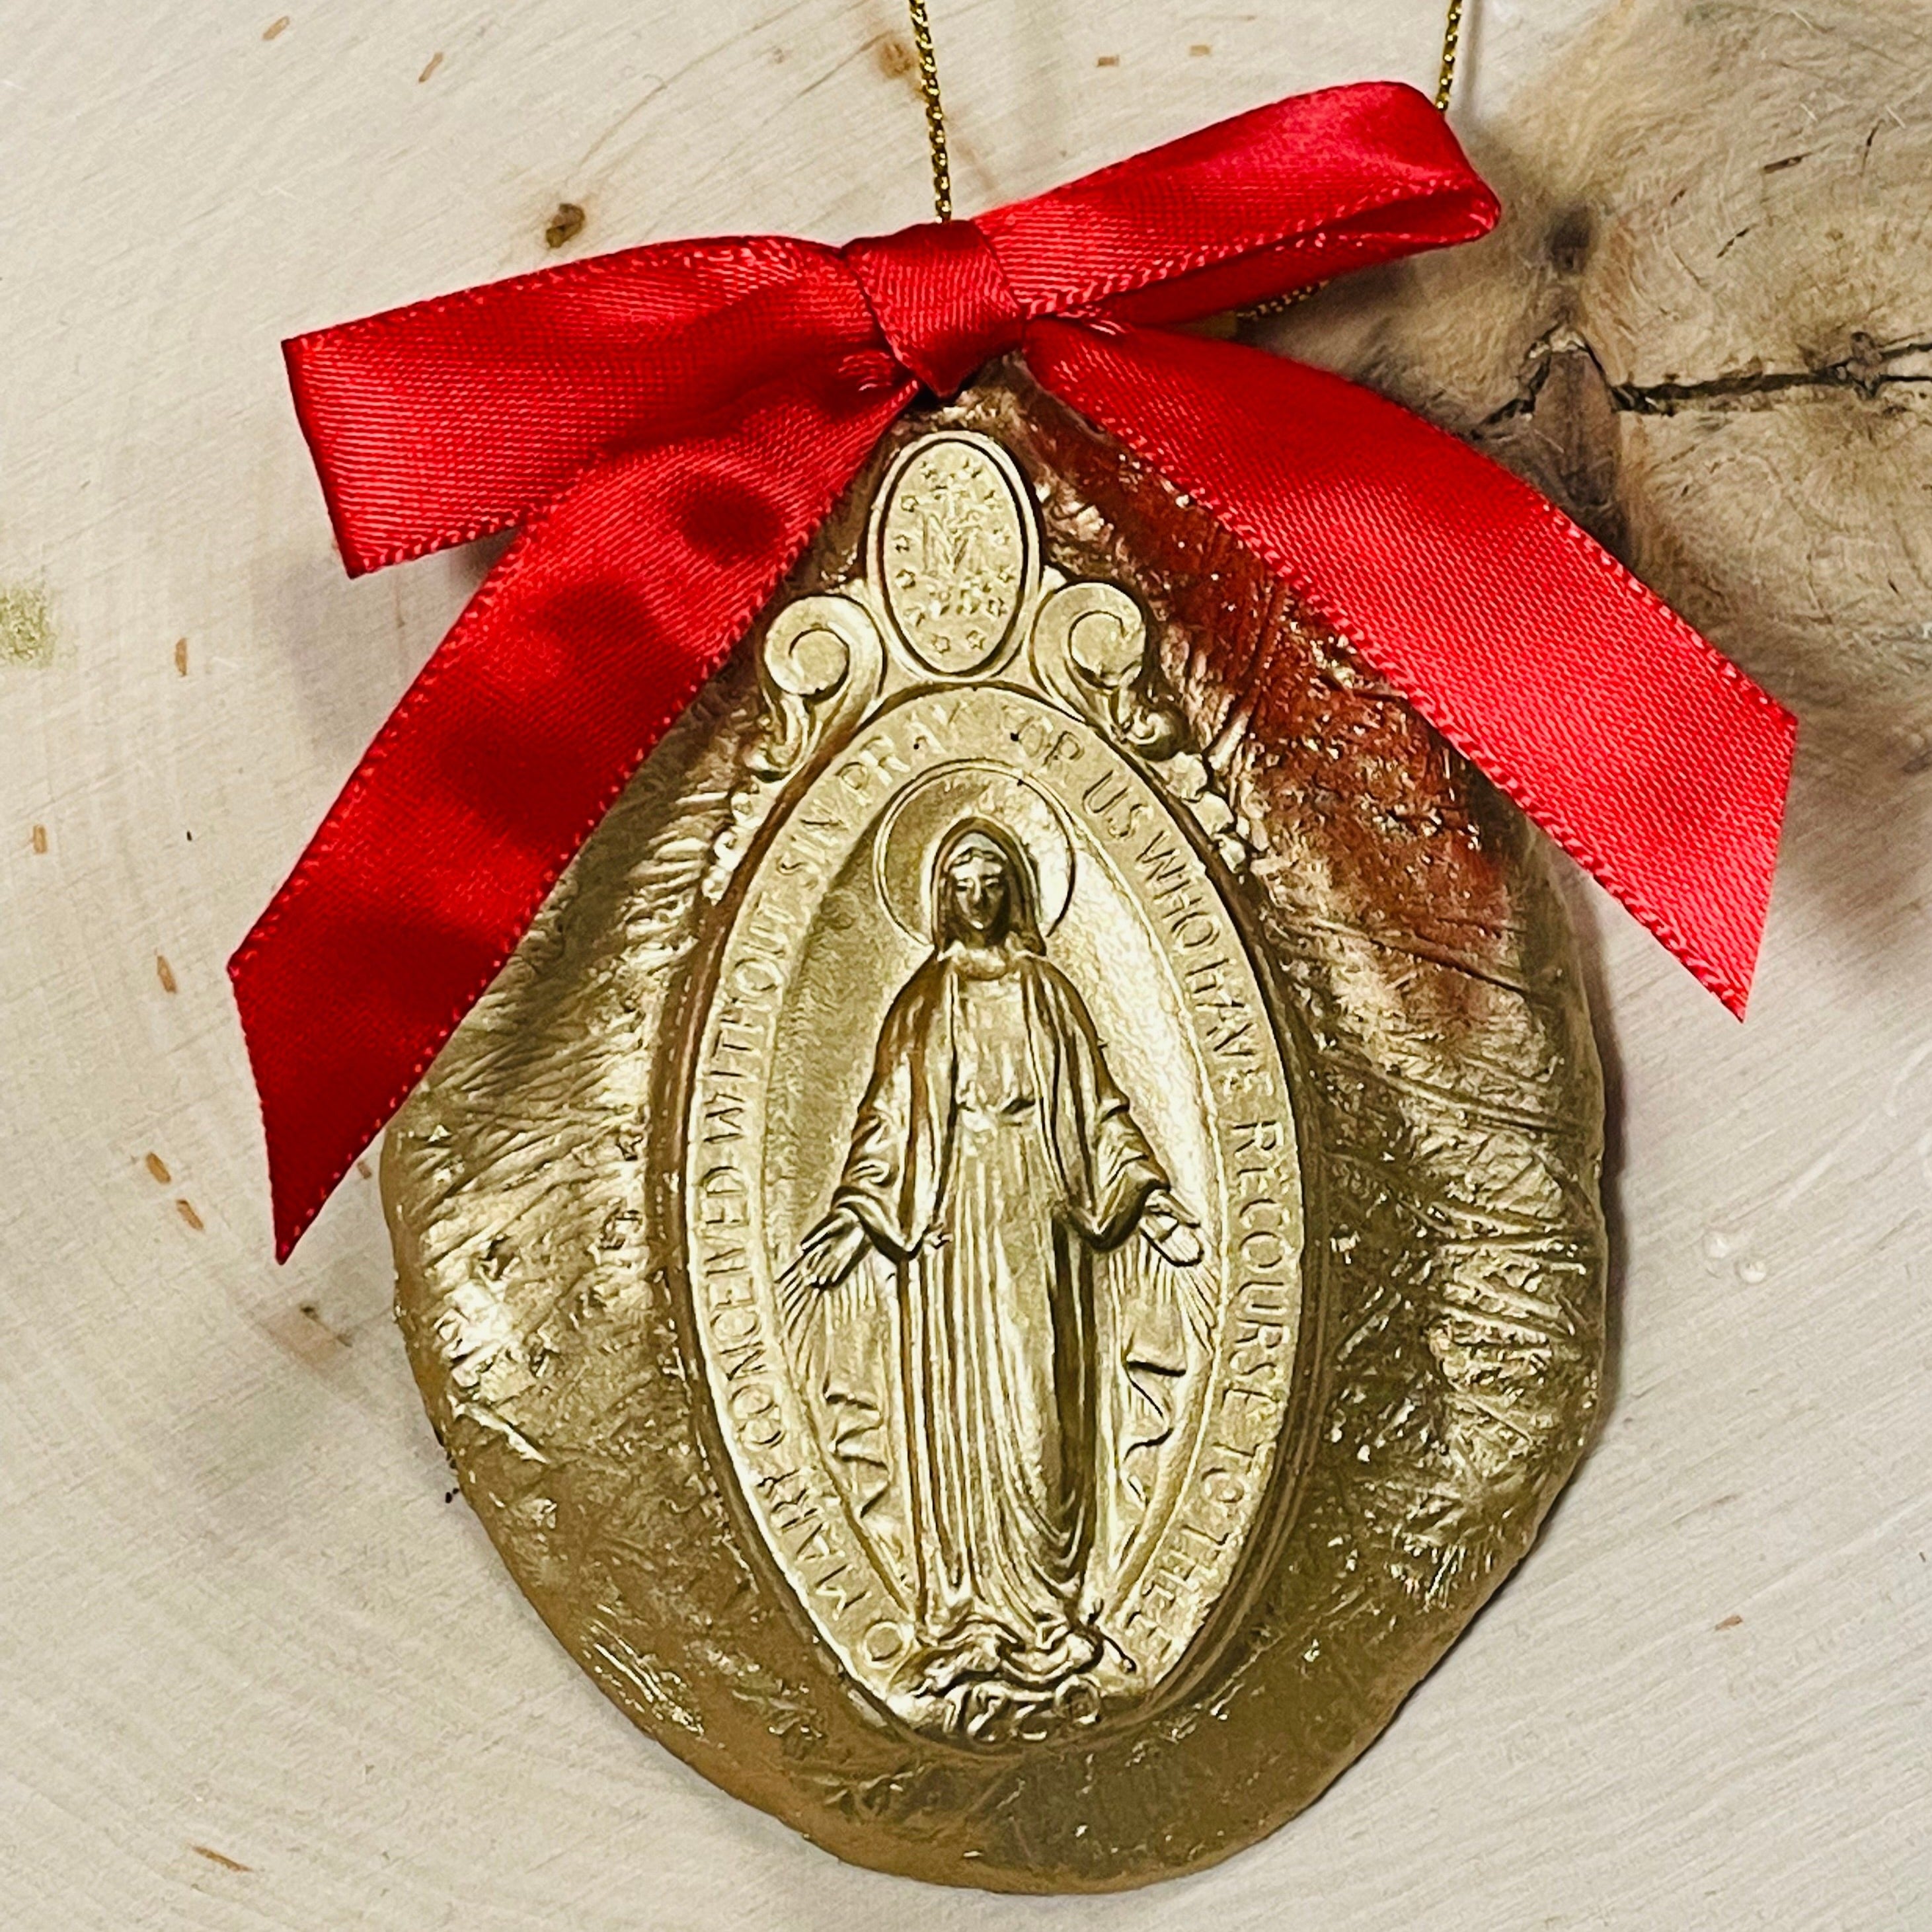 NEW:  The Small Miraculous Medal Ornament